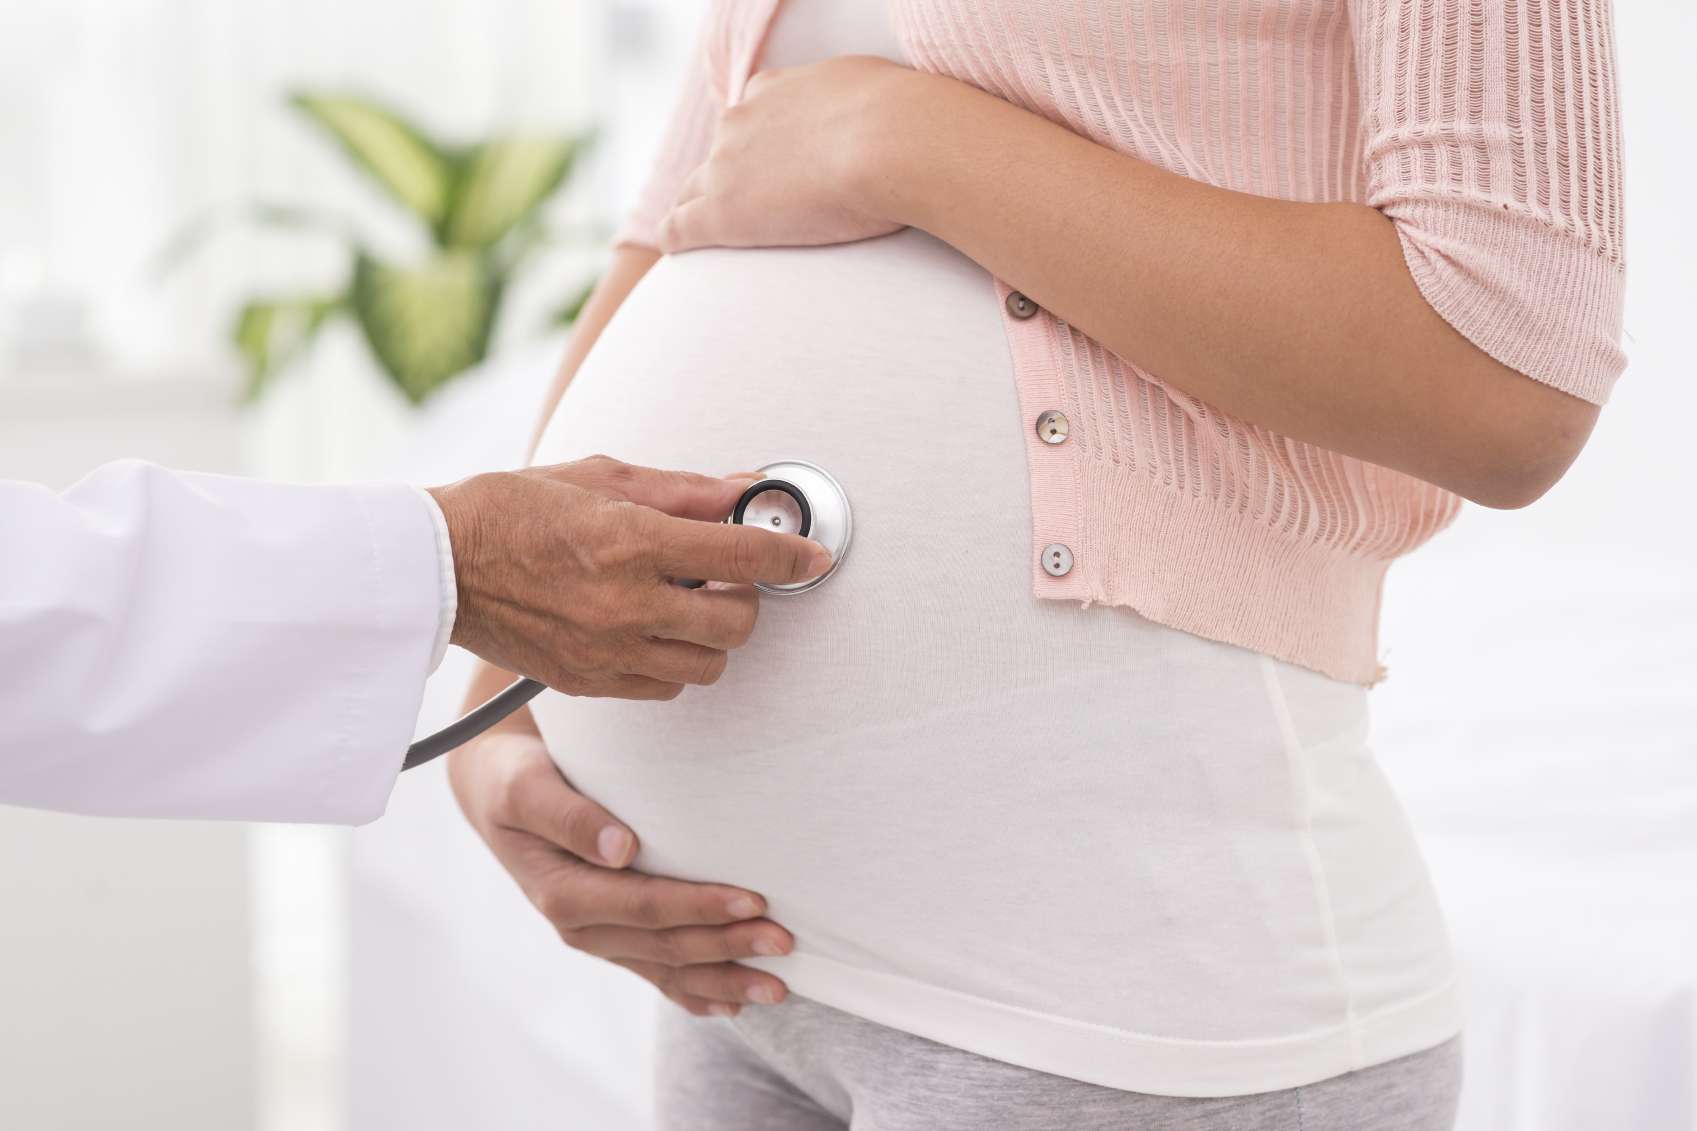 We already know about stroke, suicidal thoughts, and cancer… But using SSRIs may be putting expectant mothers at risk for even more devastating side effects.